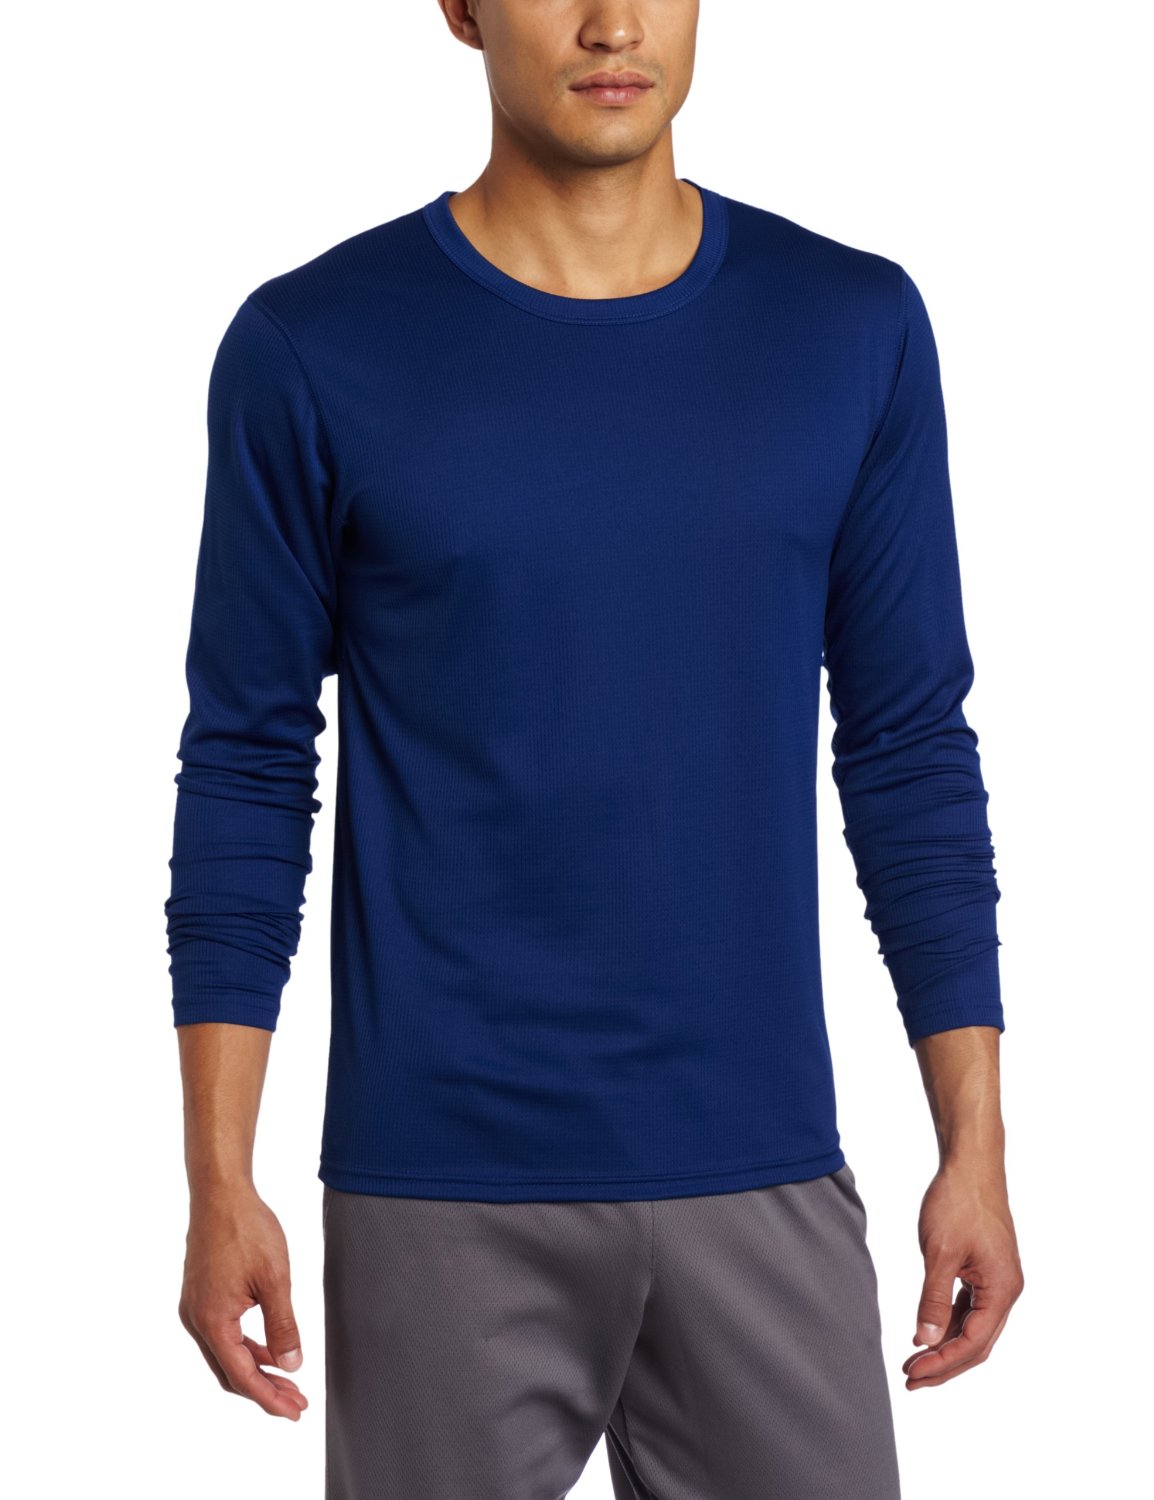 KFL1 - Duofold Varitherm Men's Base Weight/First Layer Long Sleeve Crew